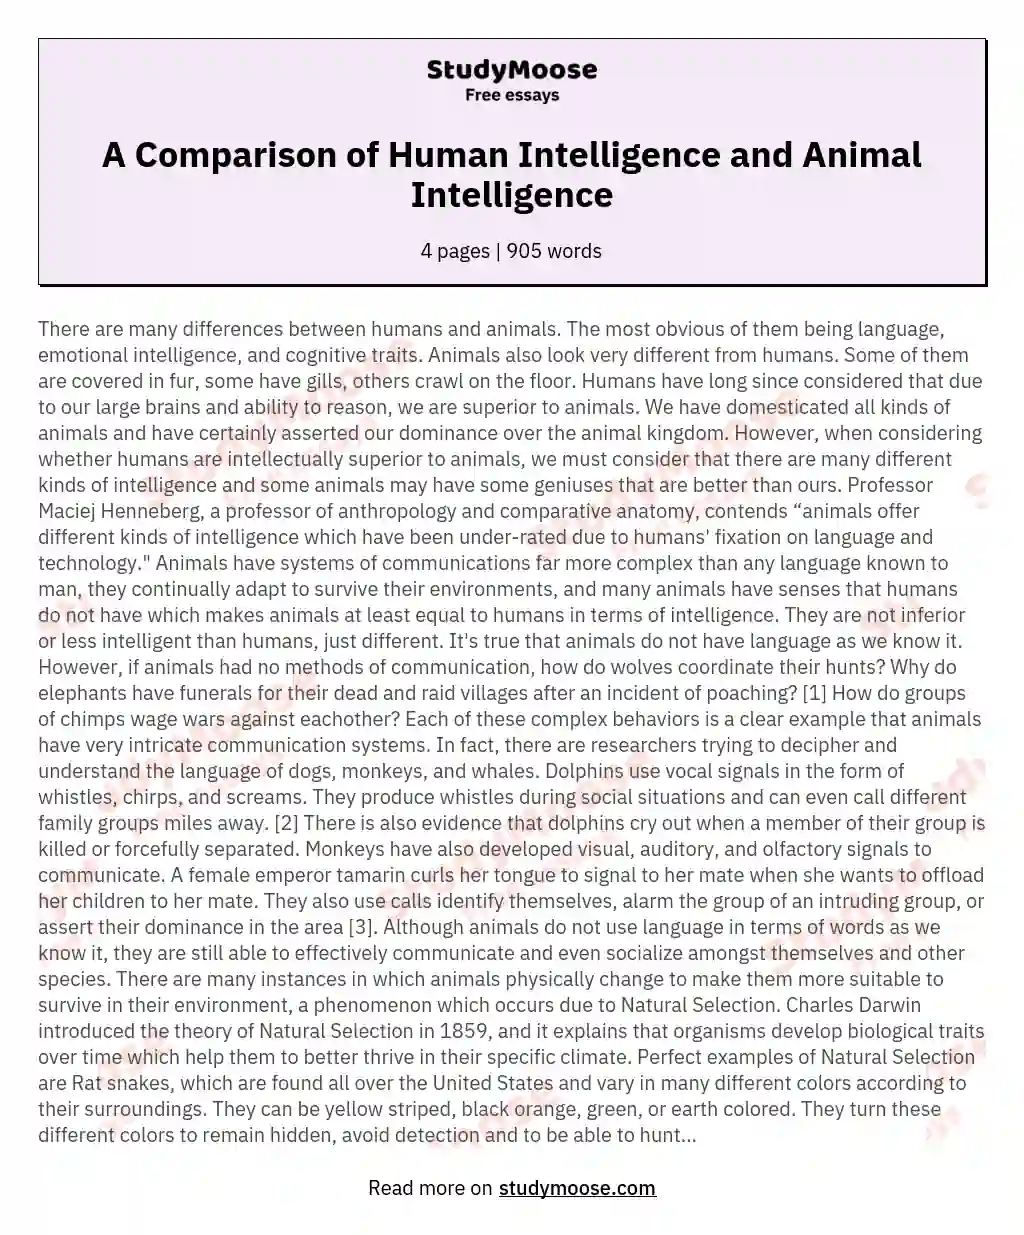 A Comparison of Human Intelligence and Animal Intelligence essay